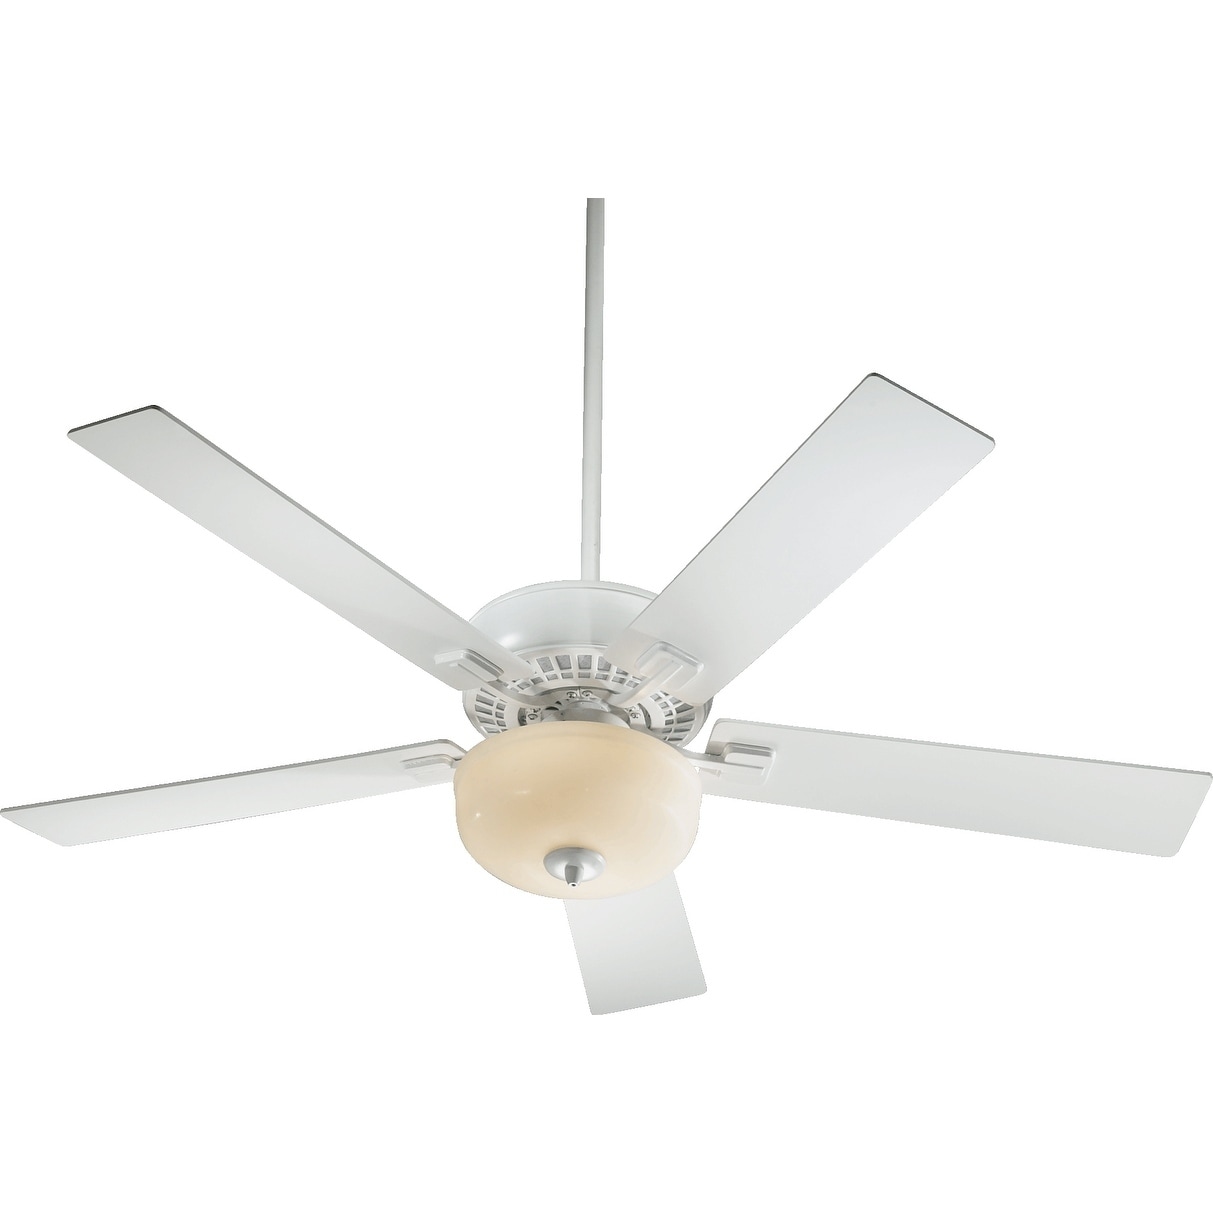 Rothman 52 5 Blade Ceiling Fan With Reversible Walnut Bronze Paddle Blades